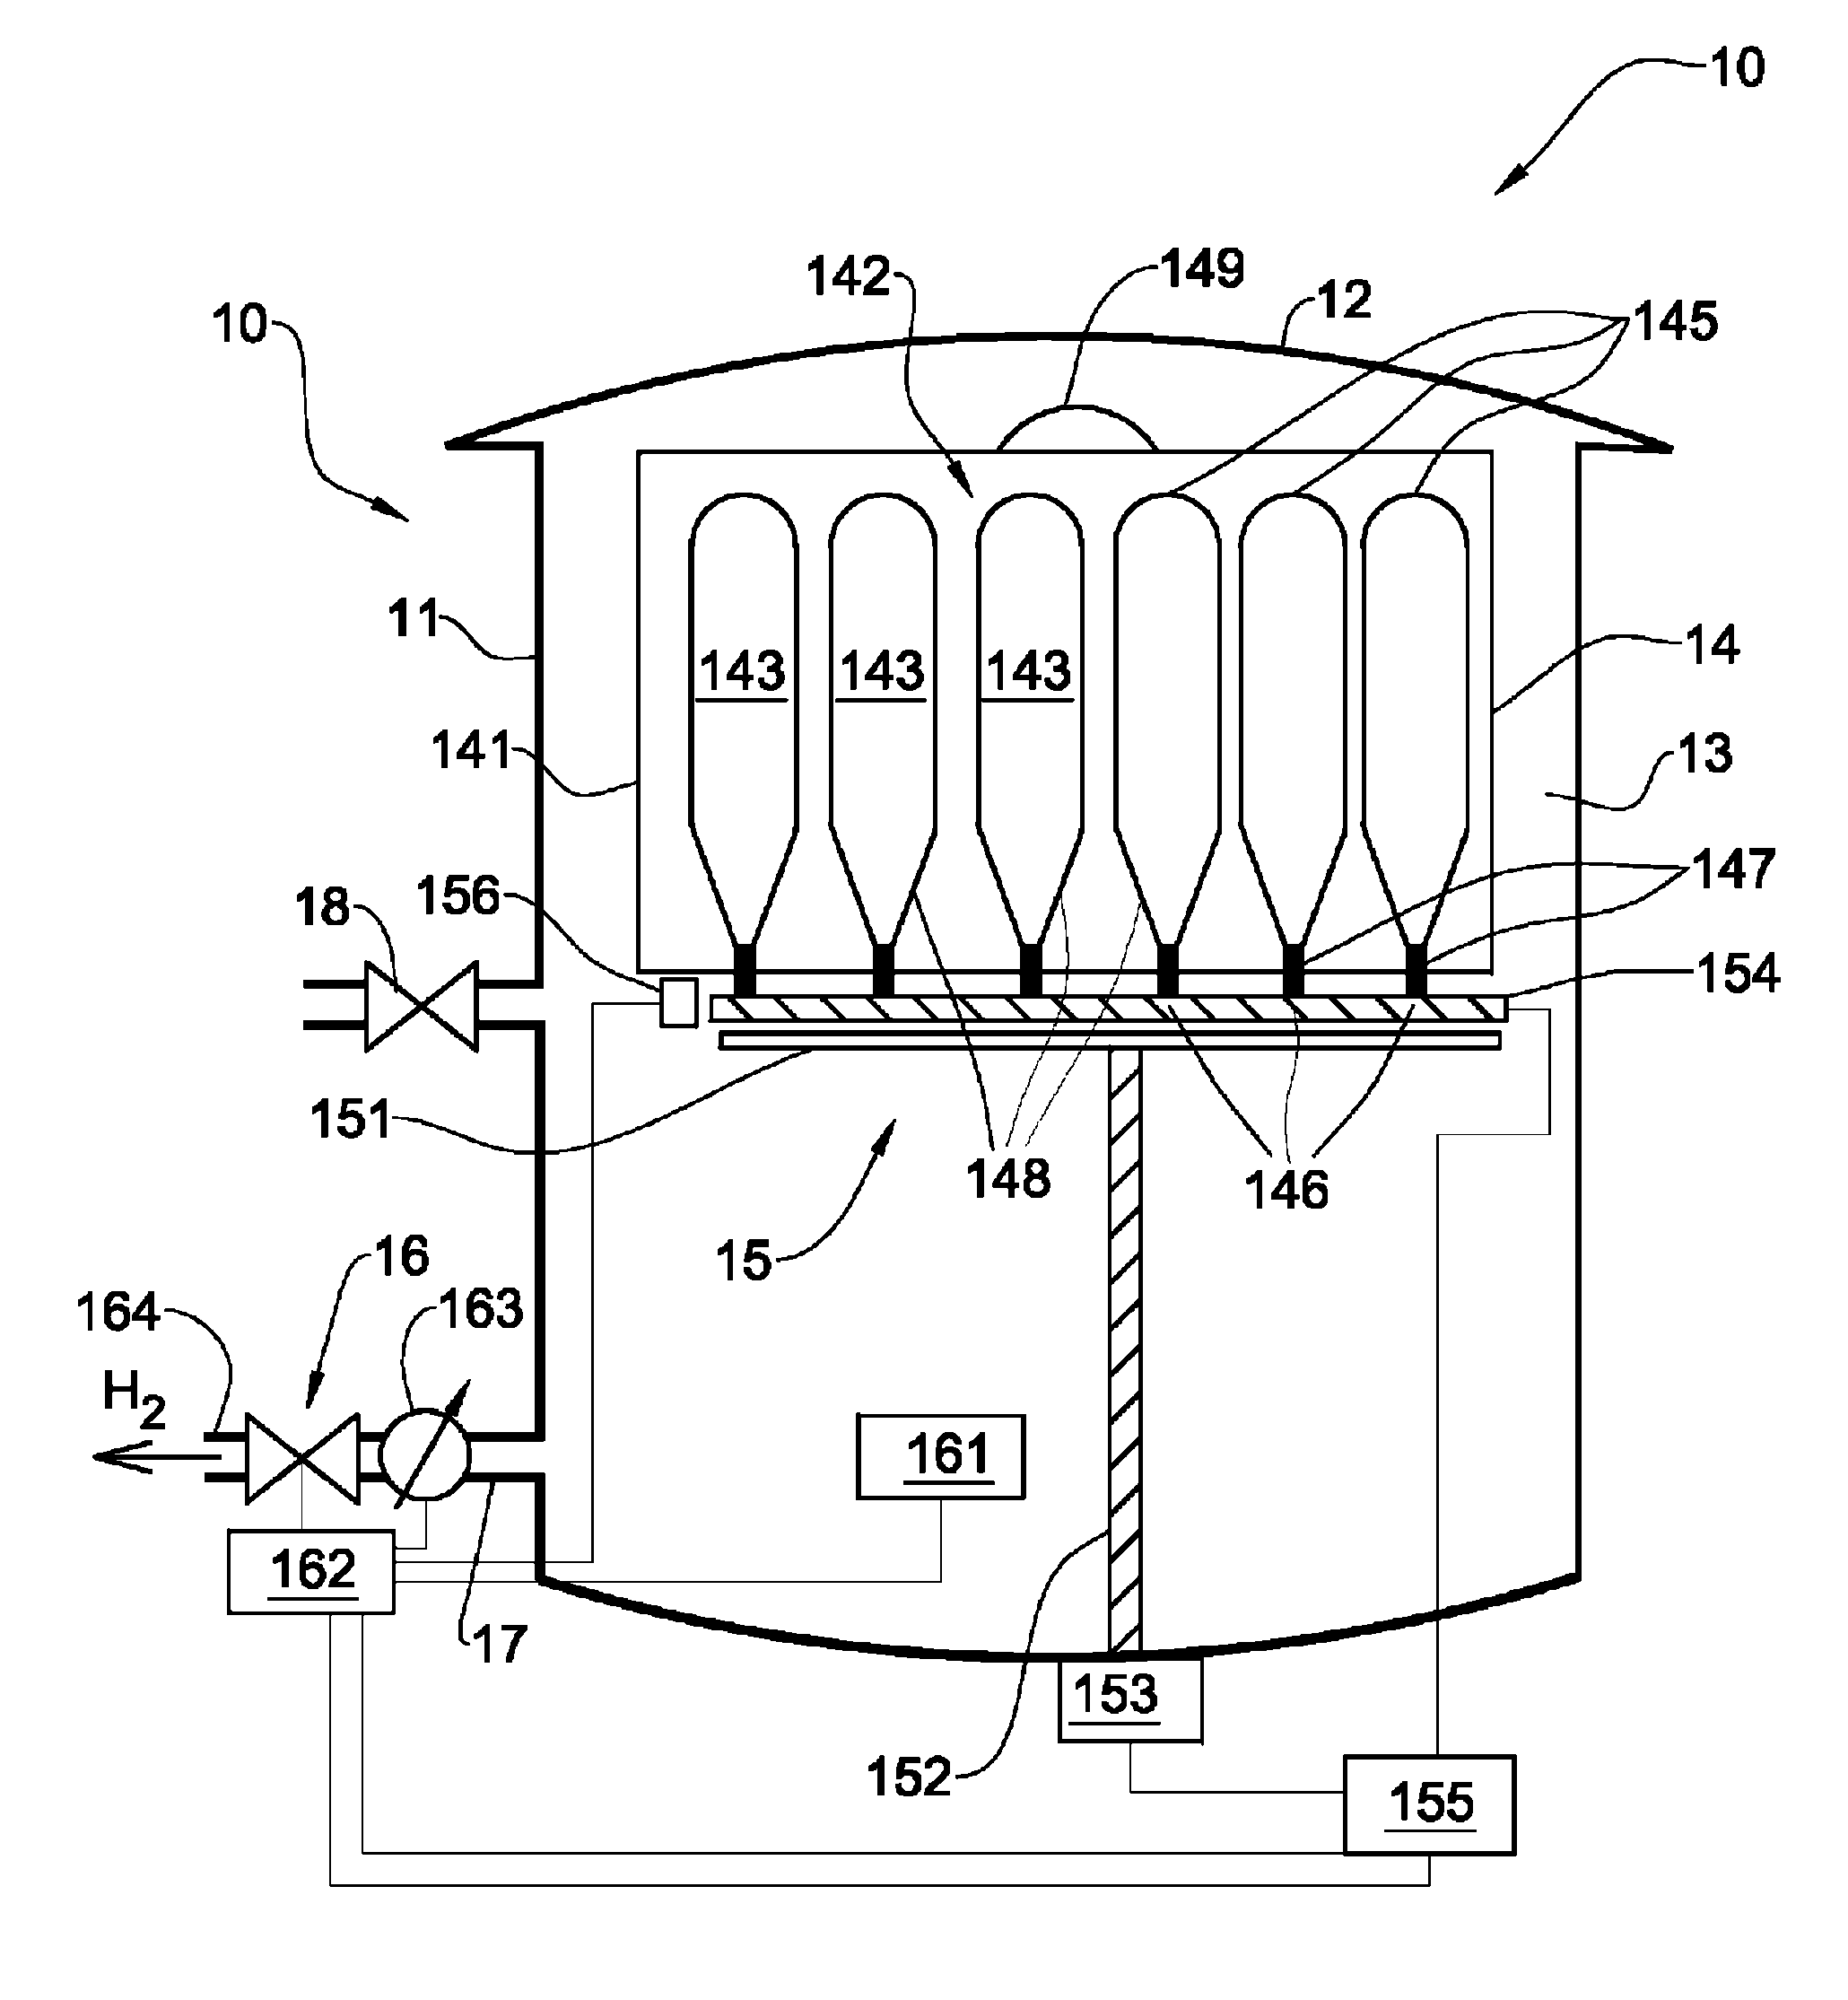 Apparatus for storage and liberation of compressed hydrogen gas in microcylindrical arrays and system for filling the microcylindrical arrays